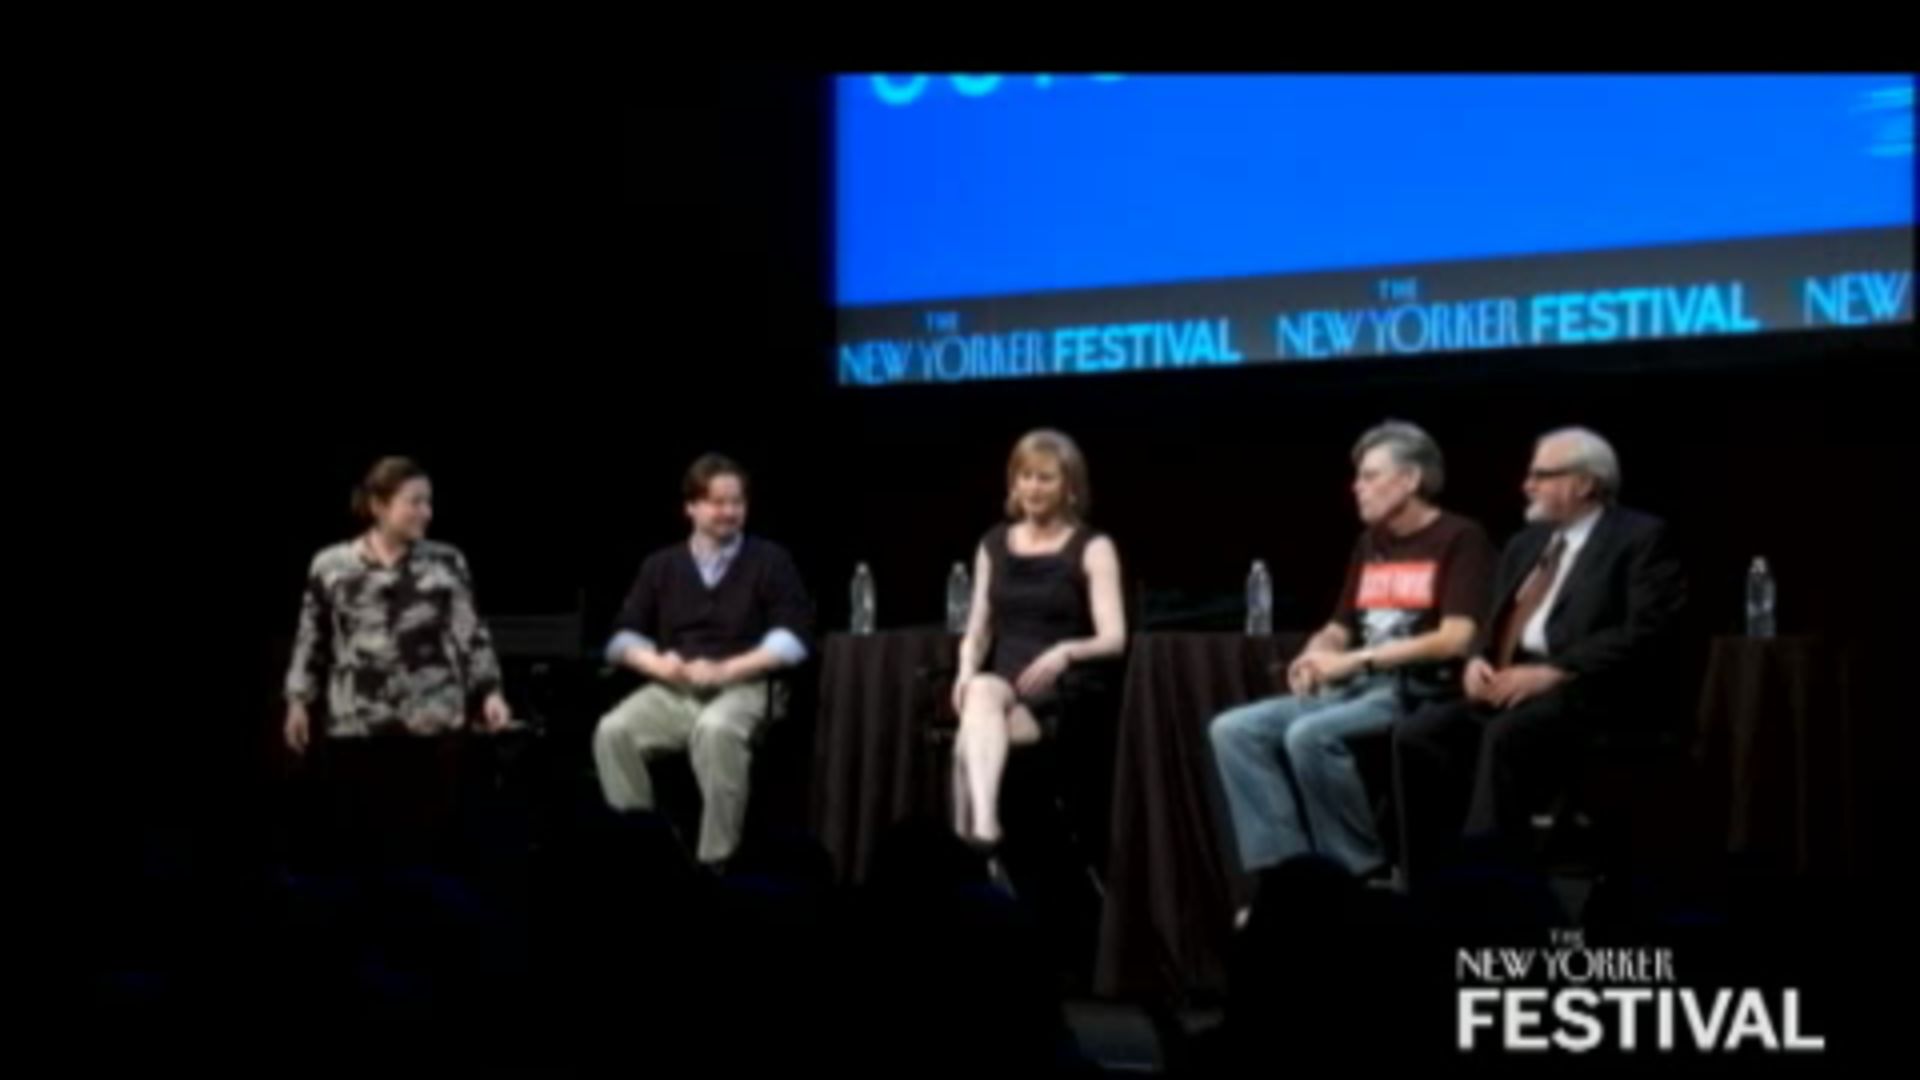 Busty Teen Webcam Sex - Watch The Vampire Revival | New Yorker Festival | The New Yorker